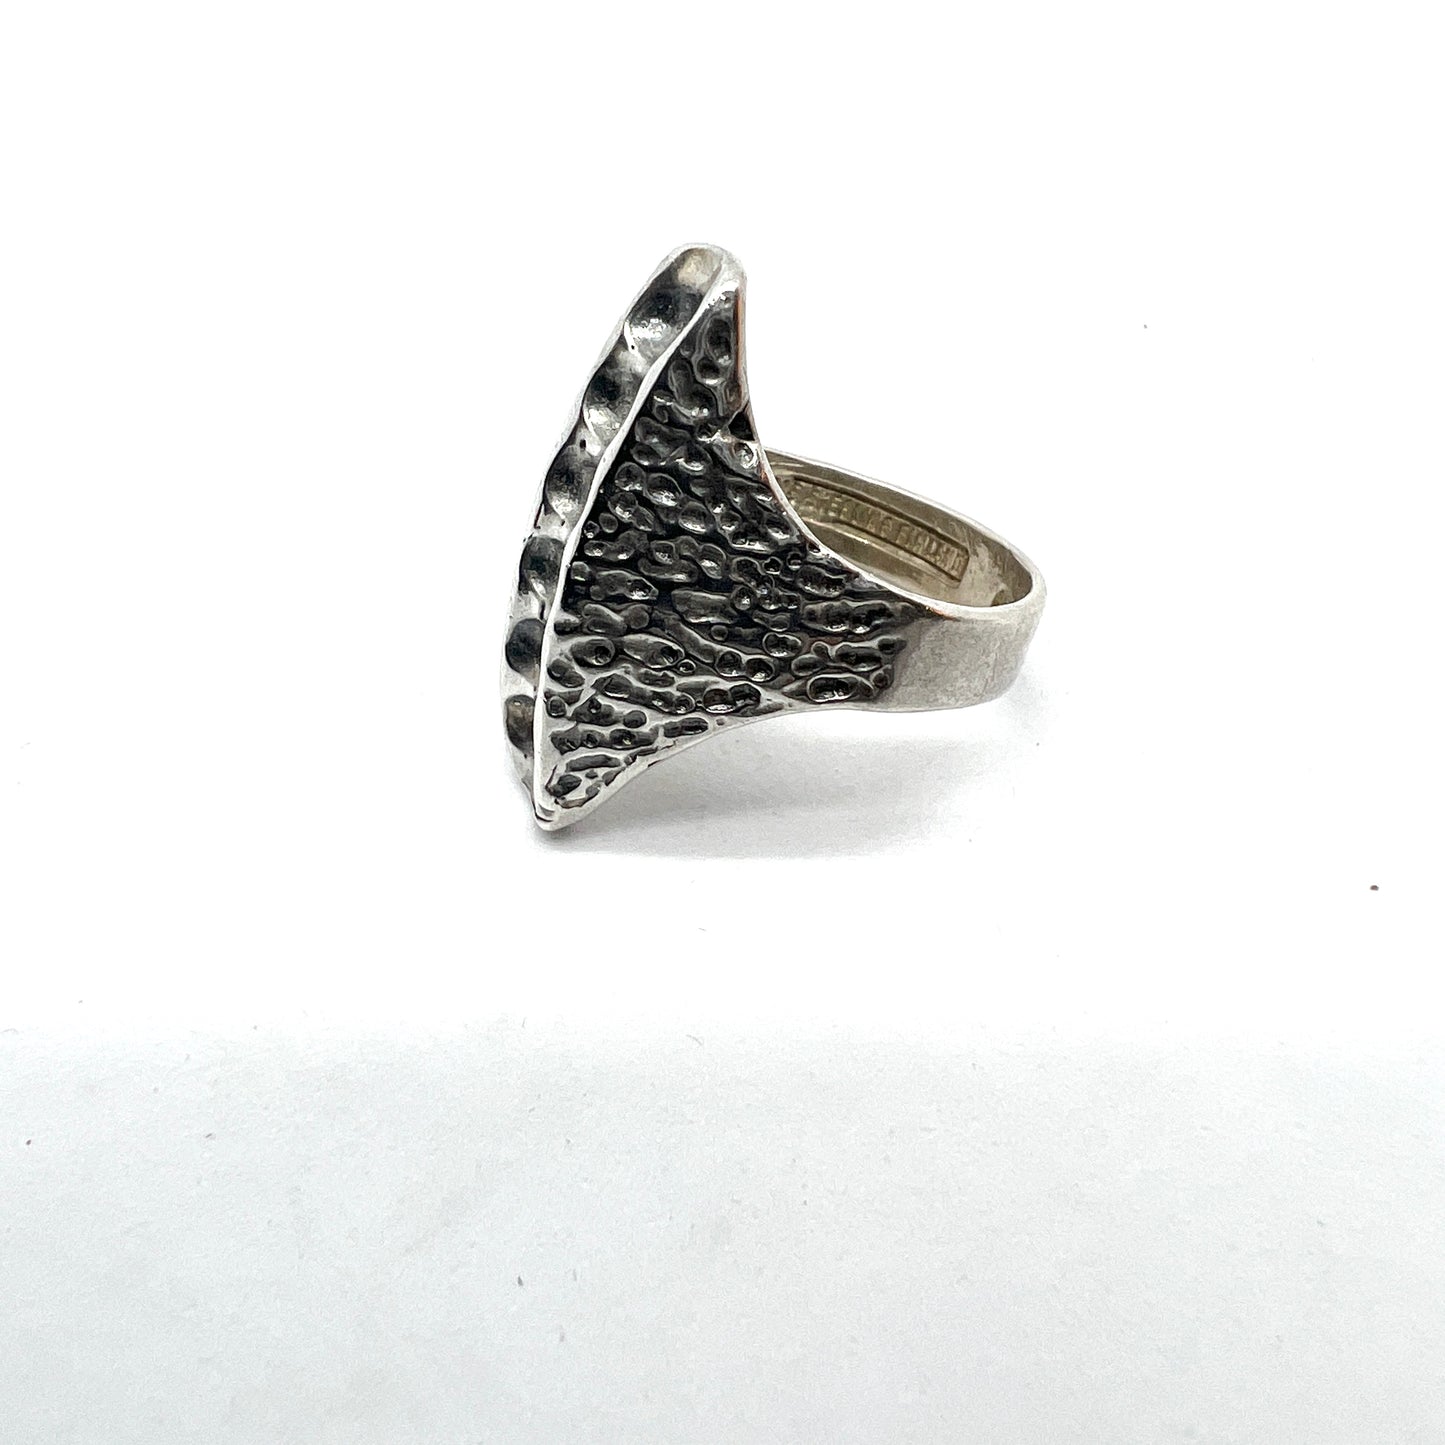 Finland 1970s. Sterling Silver Ring.